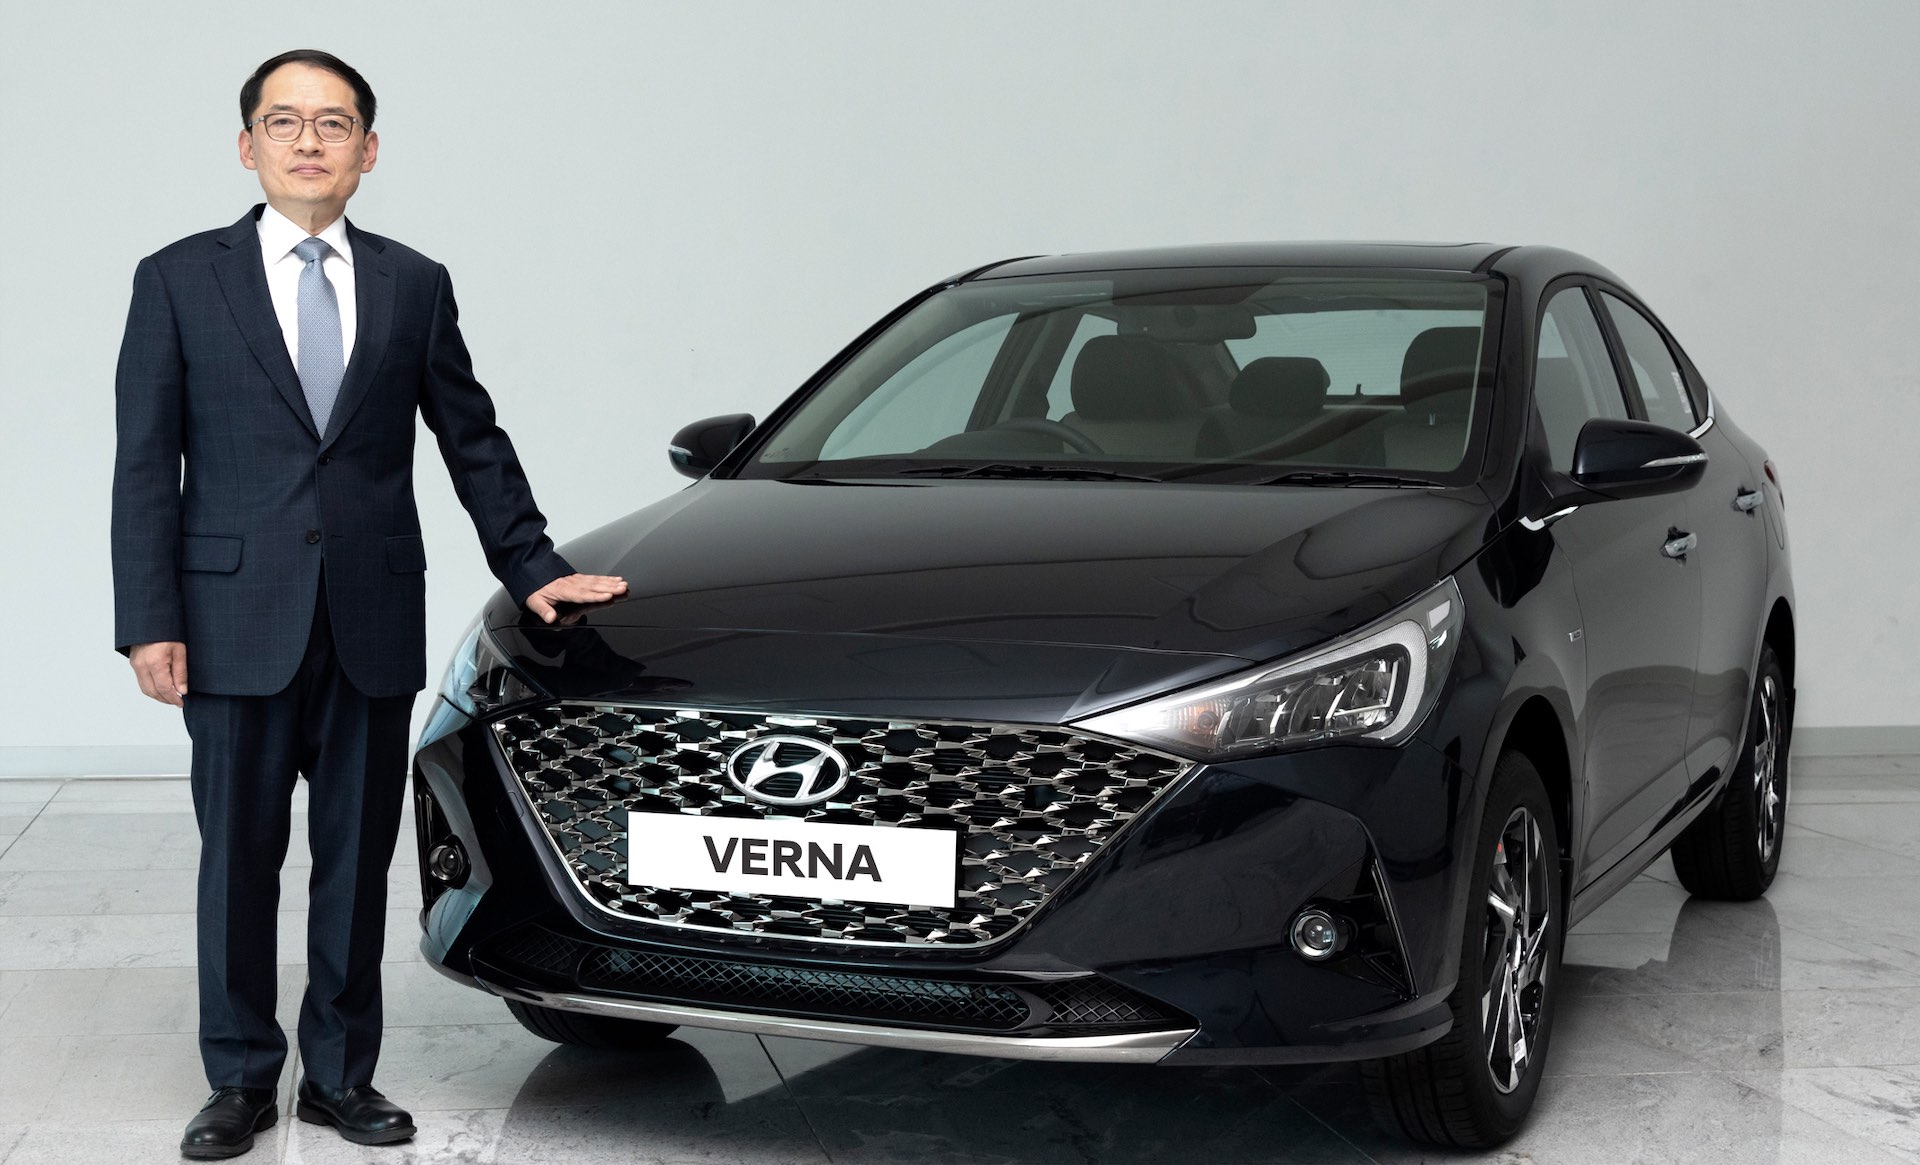 2020 Hyundai Verna Facelift Prices Officially Revealed Iab Report